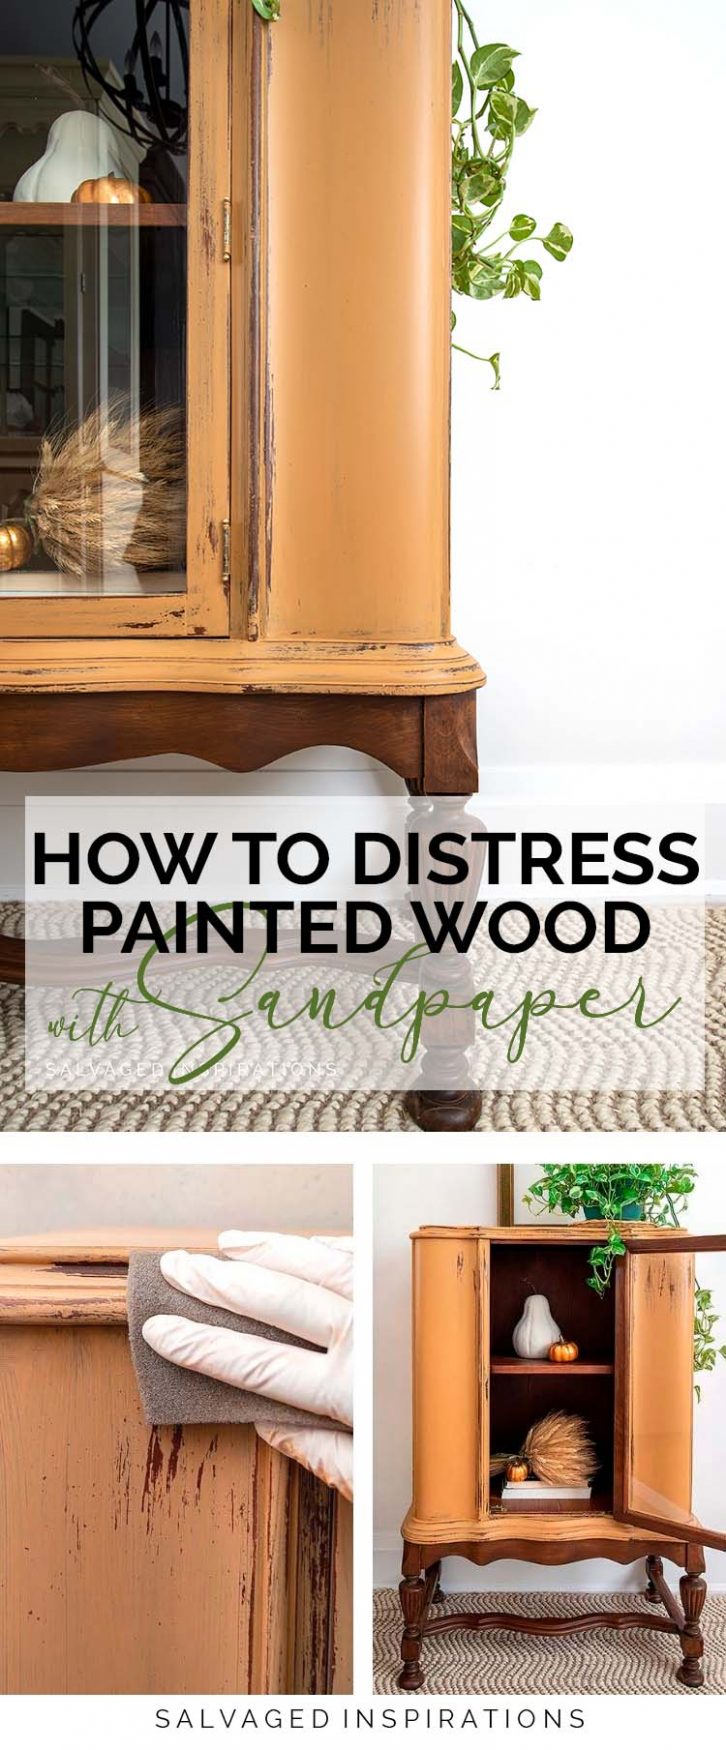 How to Distress Painted Wood with Sandpaper PIN